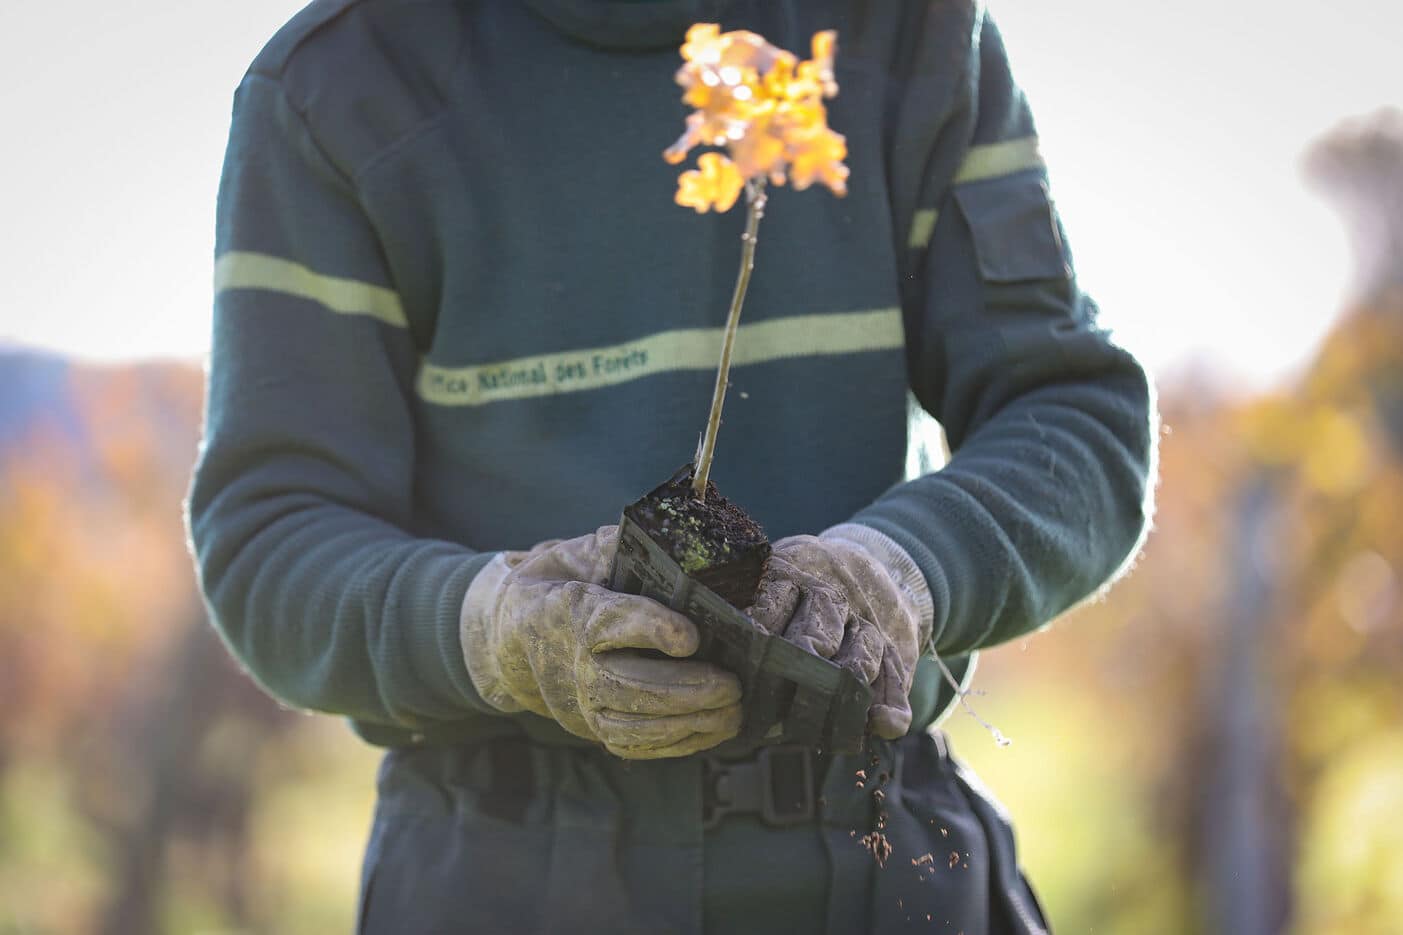 A photo of a man in a dark blue sweater and gloves planting a wine plant